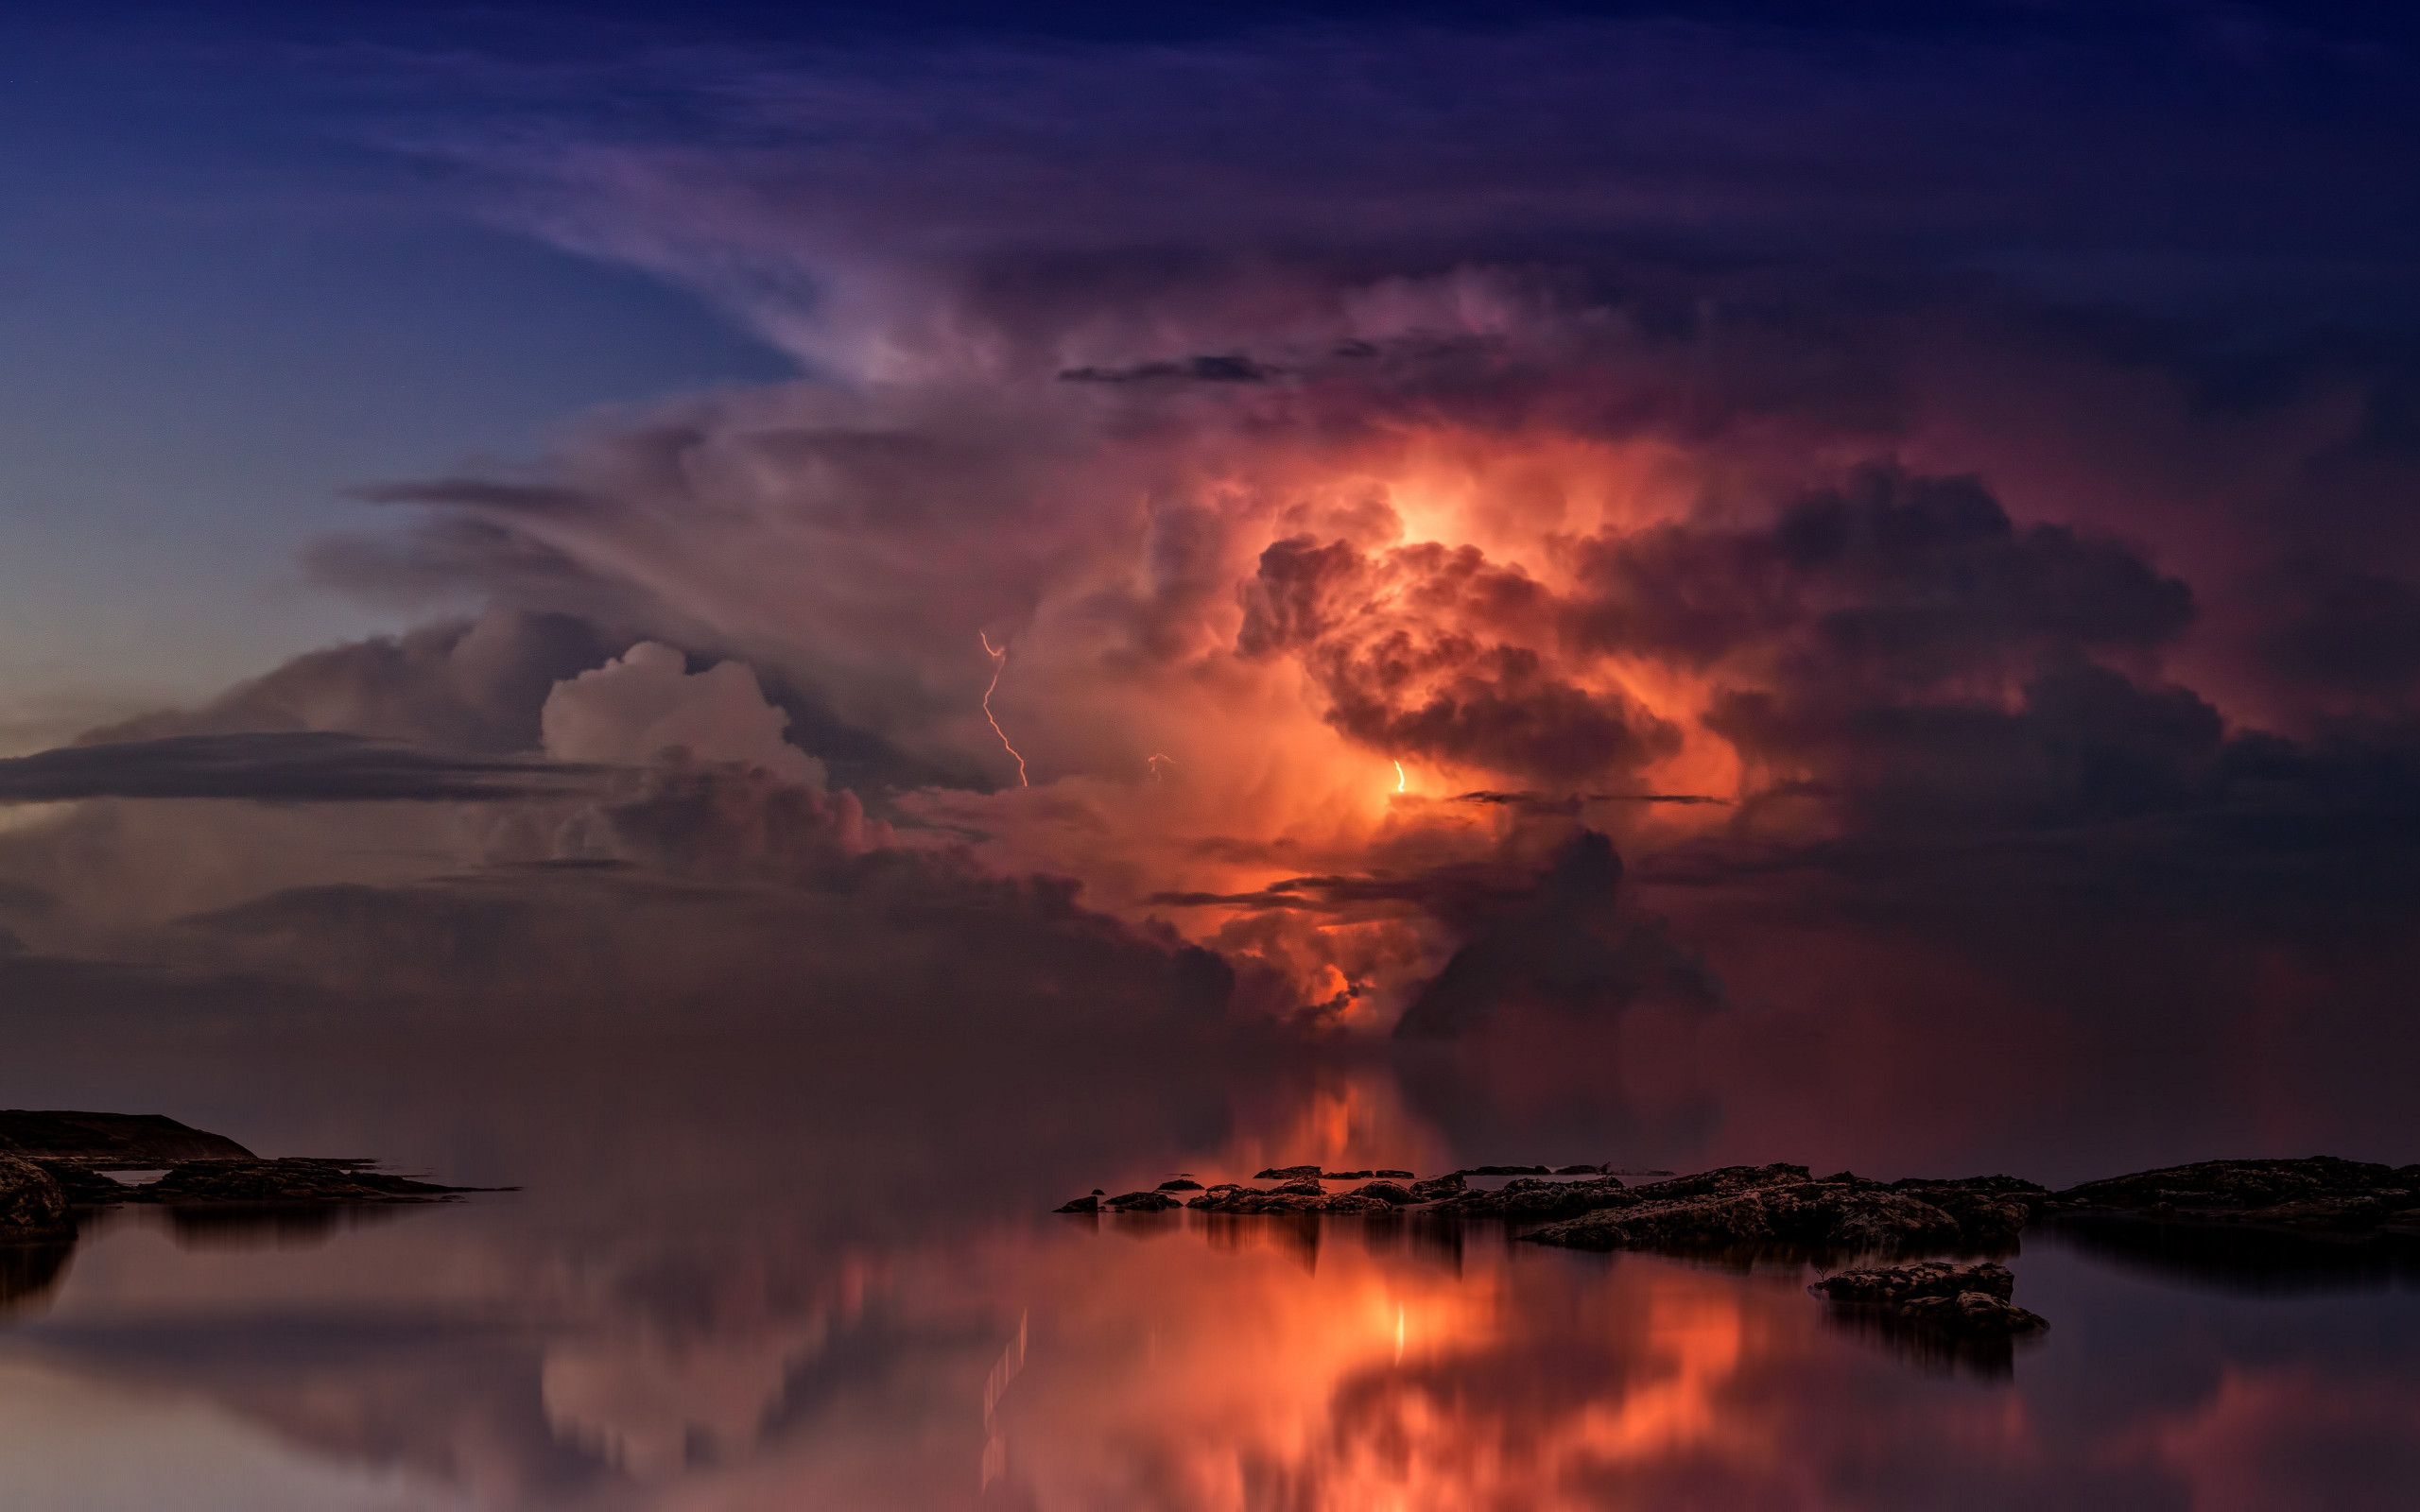 Lightning and thunderstorm in the sky wallpaper 2560x1600